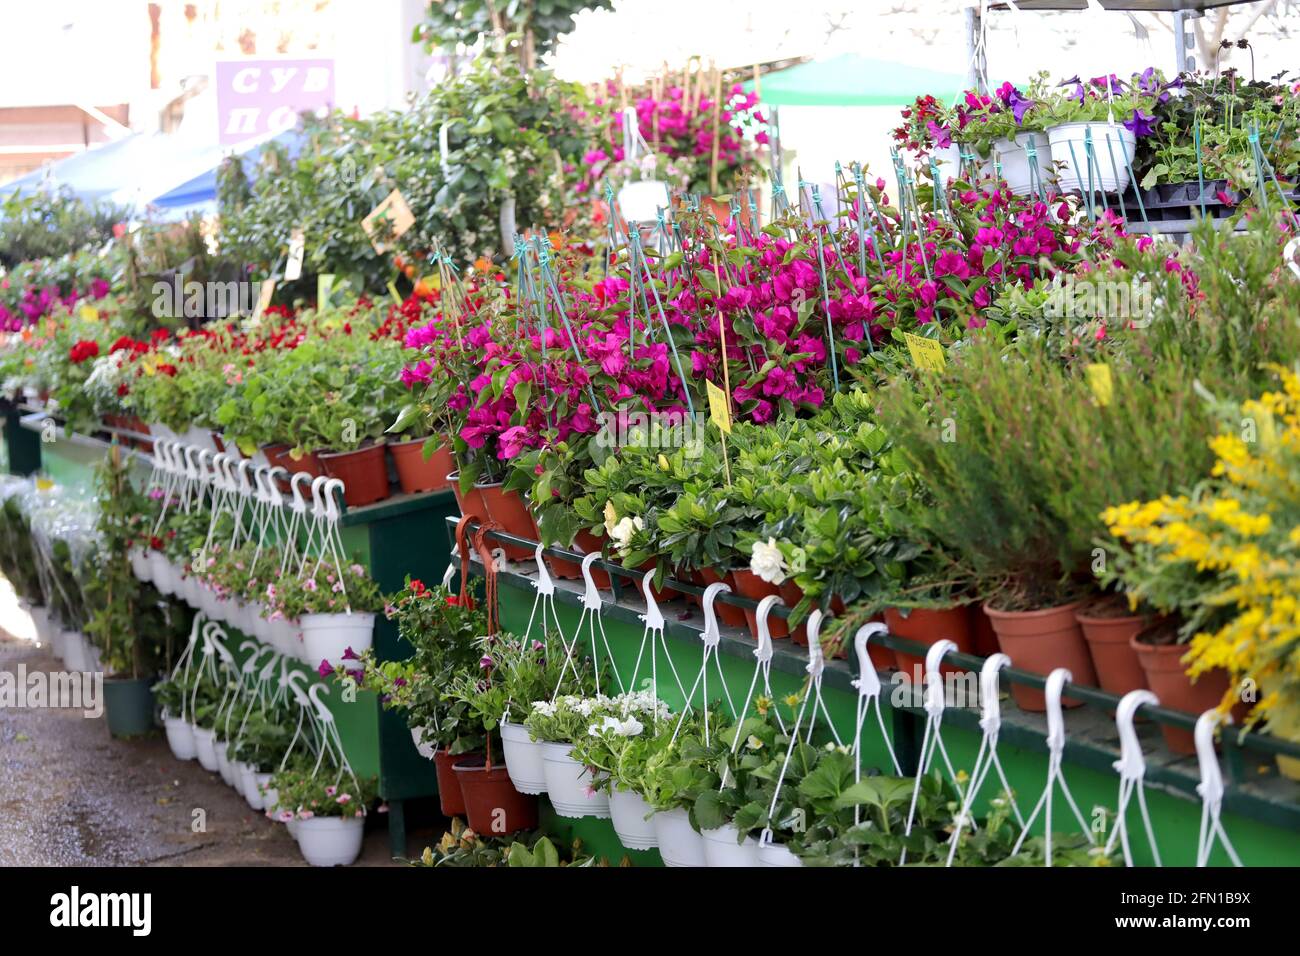 Flowers and herbs at flower market Stock Photo